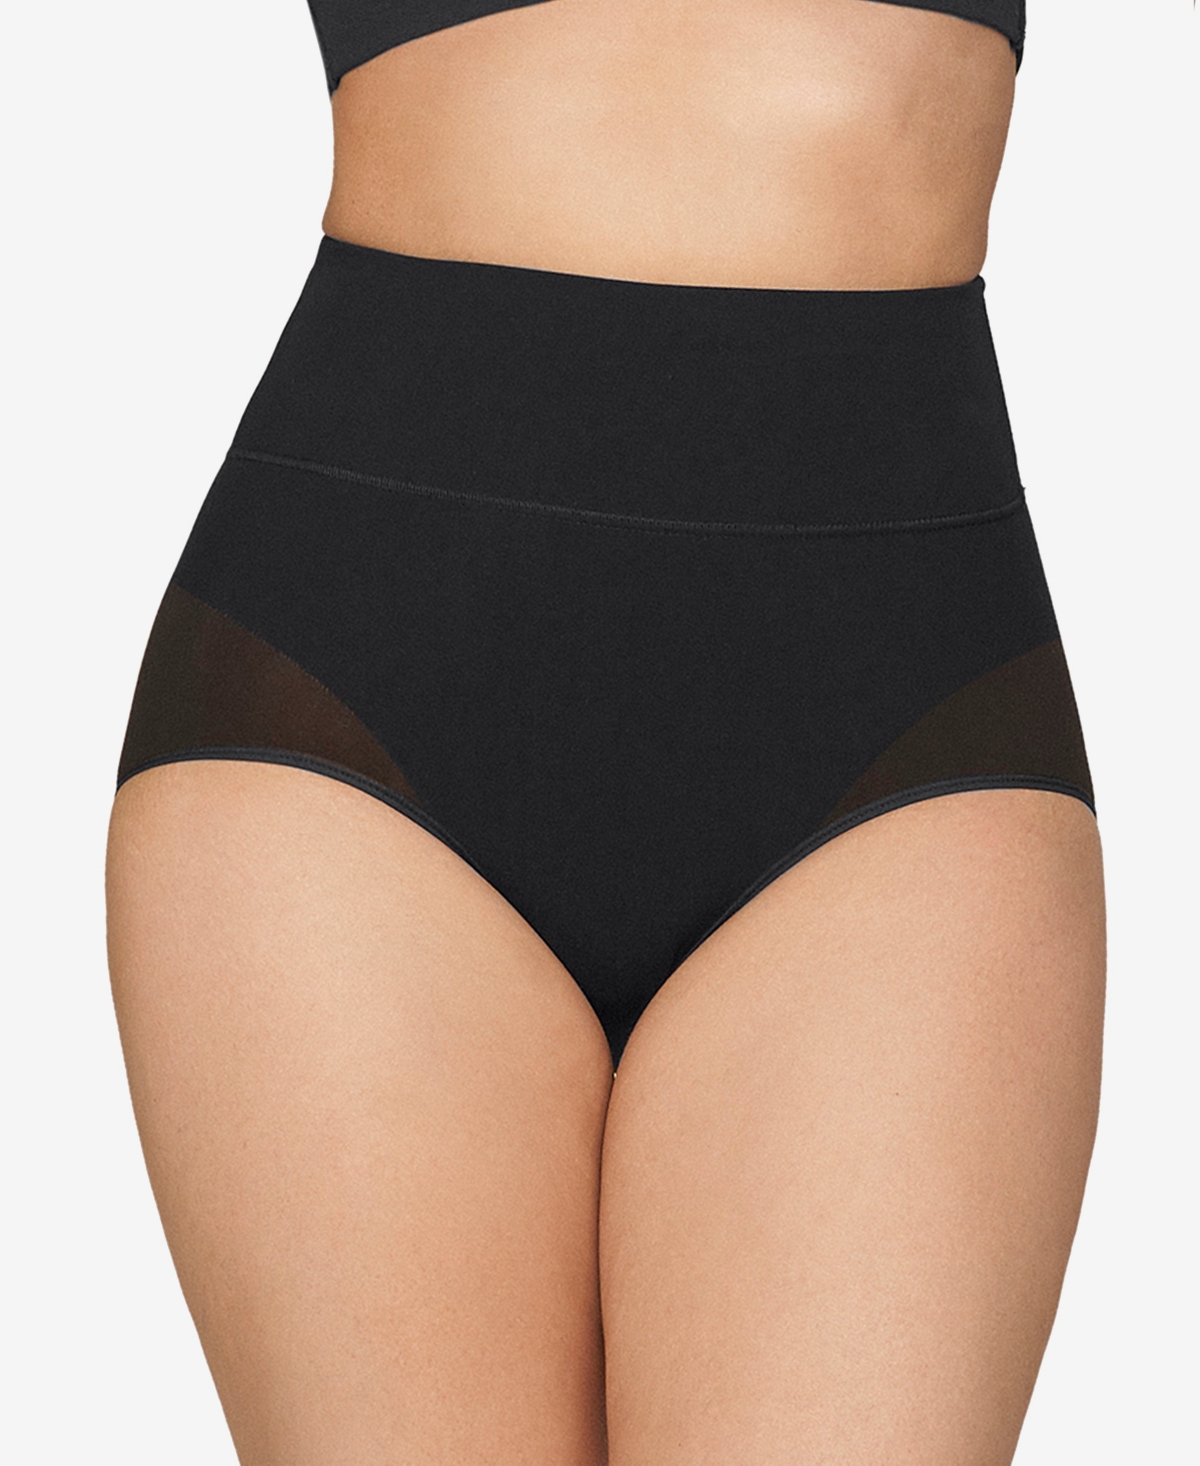 Leonisa Women's High-Waisted Classic Smoothing Brief